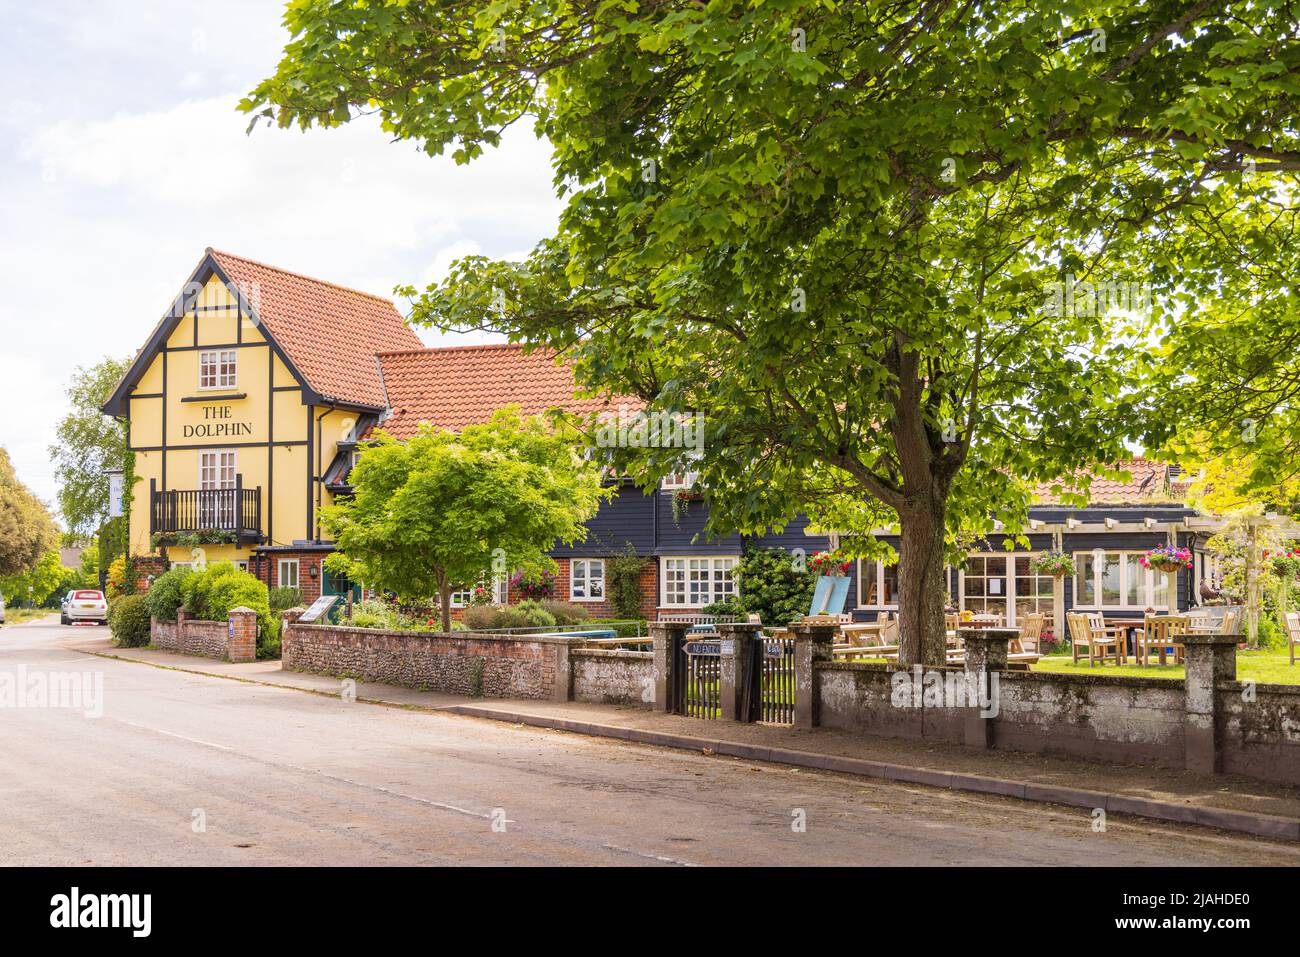 View of the Dolphin Inn pub, formerly known as the Crown Inn, Thorpeness, Suffolk. UK. Stock Photo